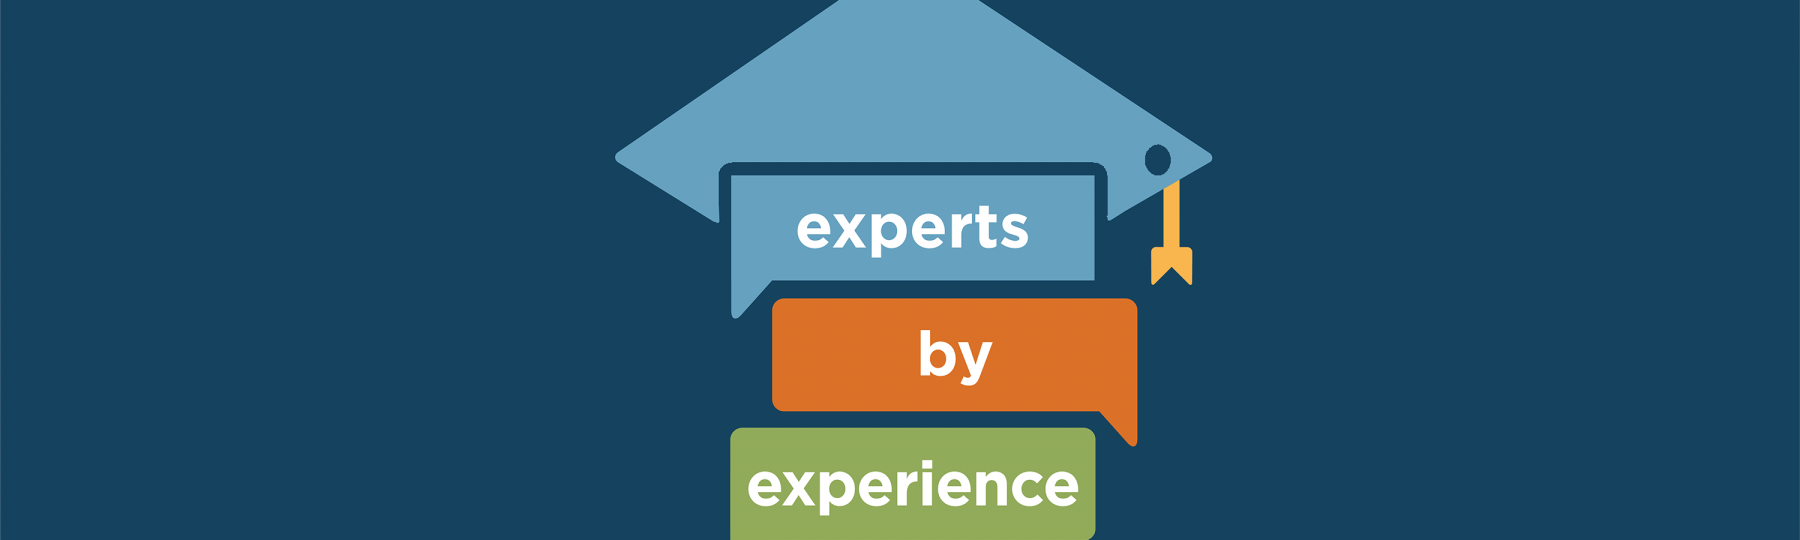 Experts by Experience logo